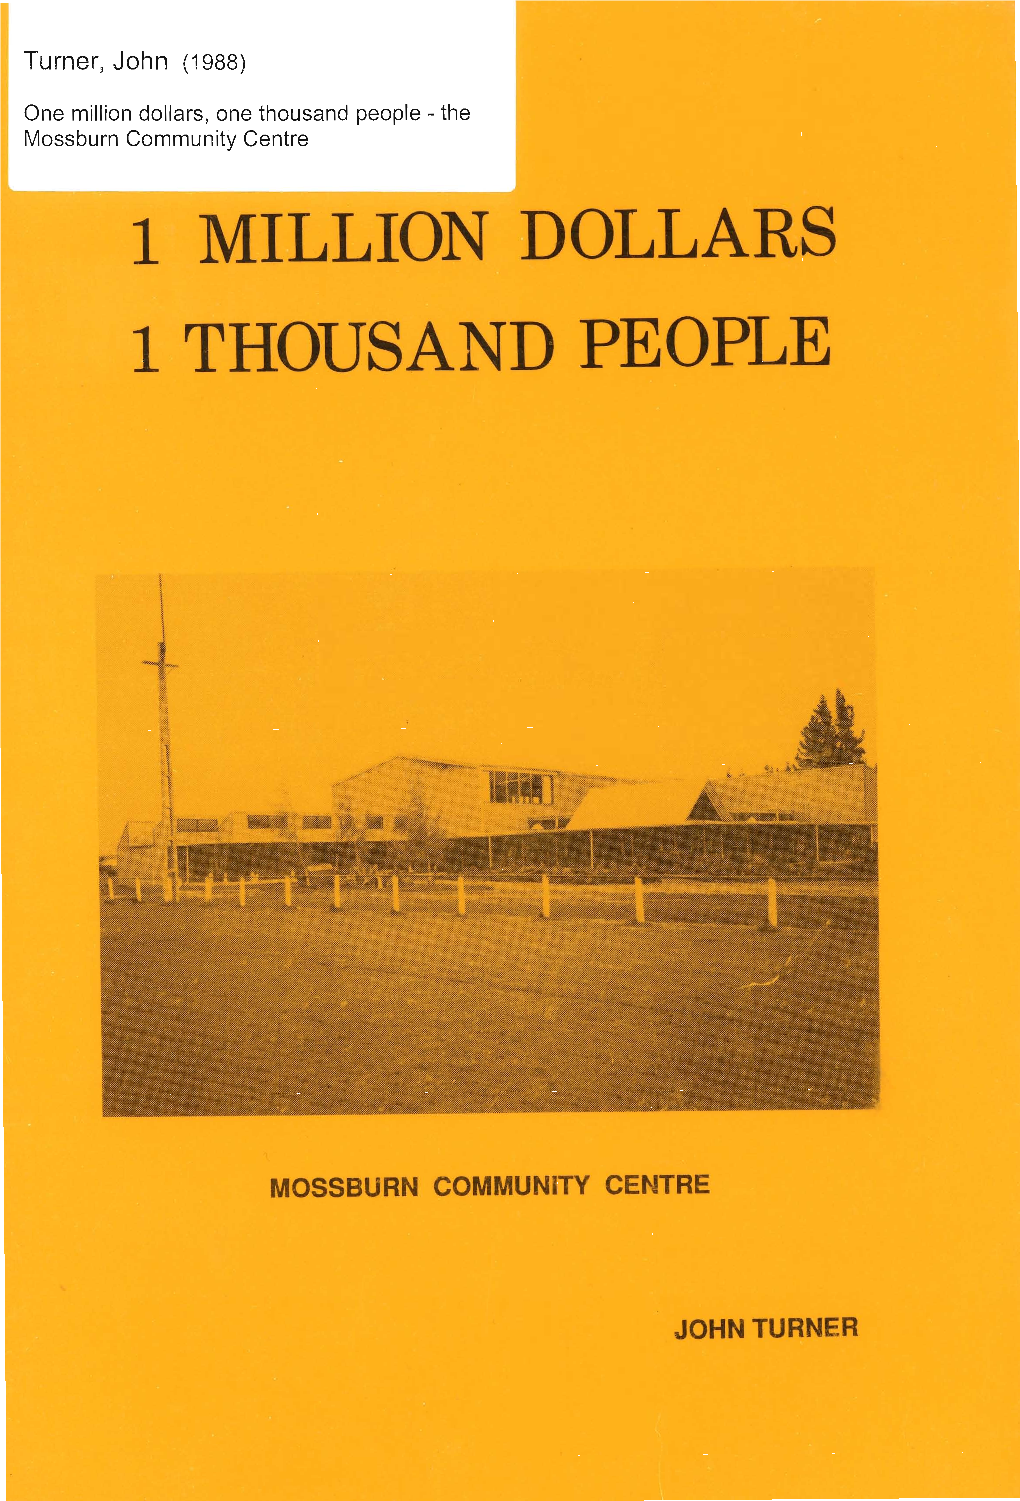 One Million Dollars, One Thousand People - the Mossburn Community Centre 1 MILLION DOLLARS 1 THOUSAND PEOPLE